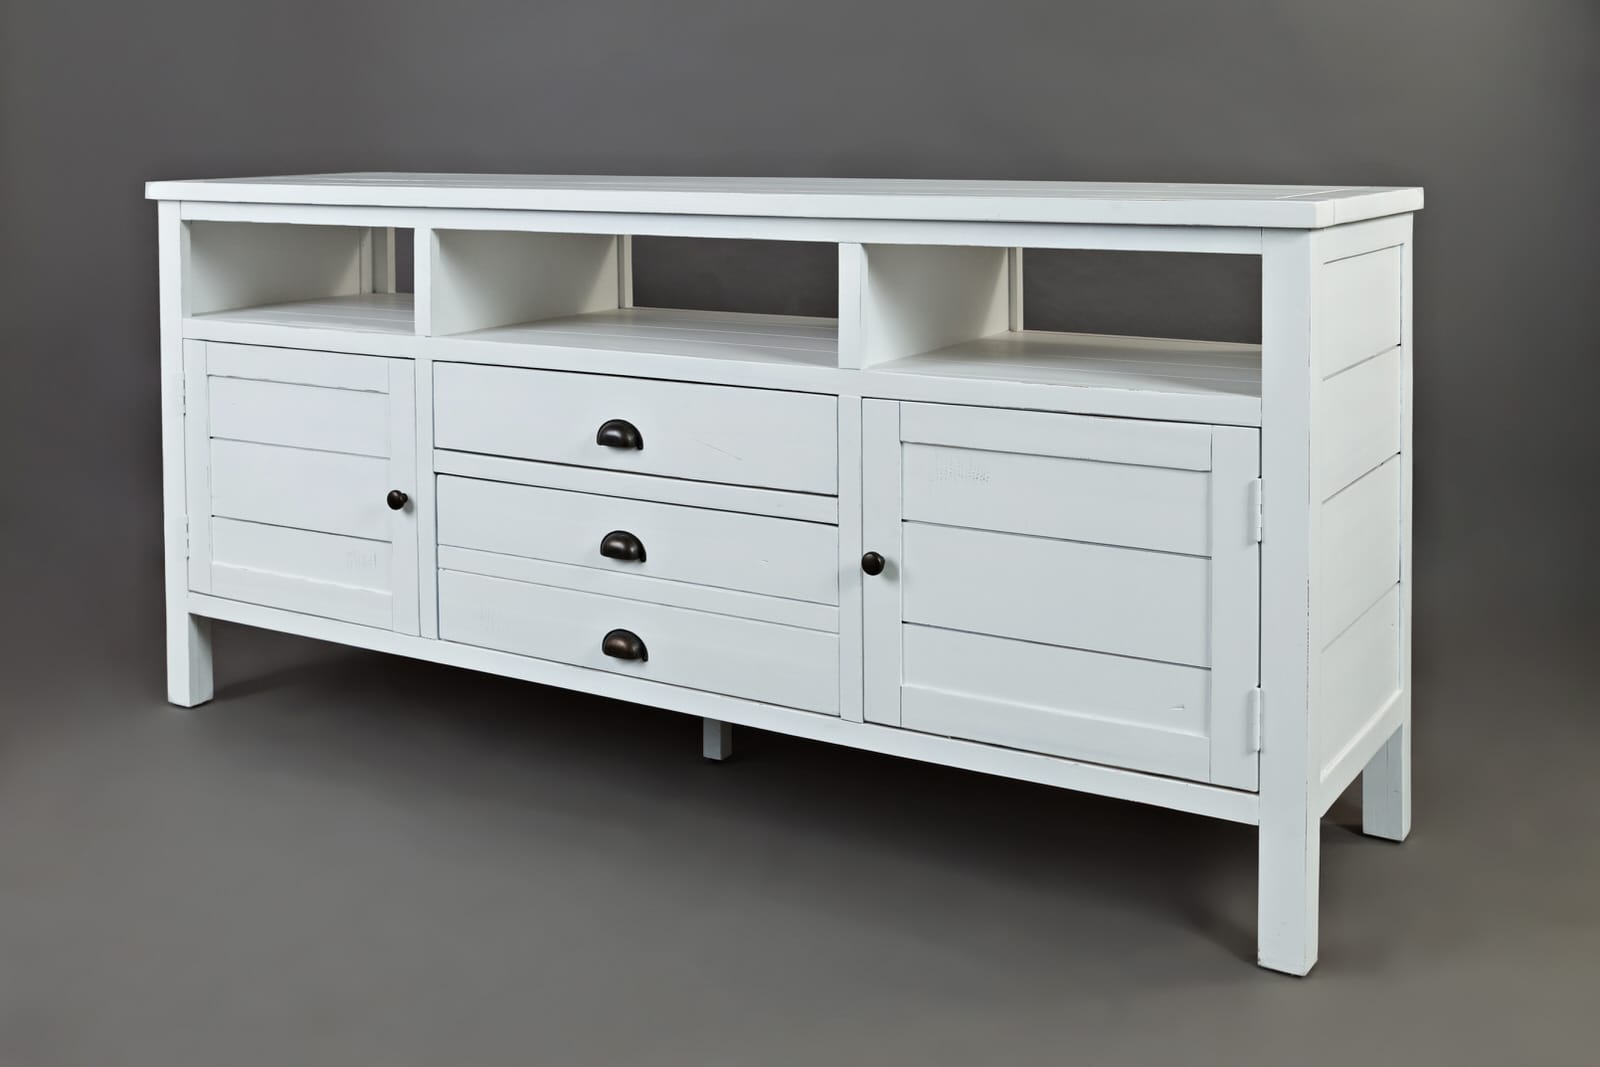 Artisan S Craft Weathered White 70 Inch Media Console By Jofran